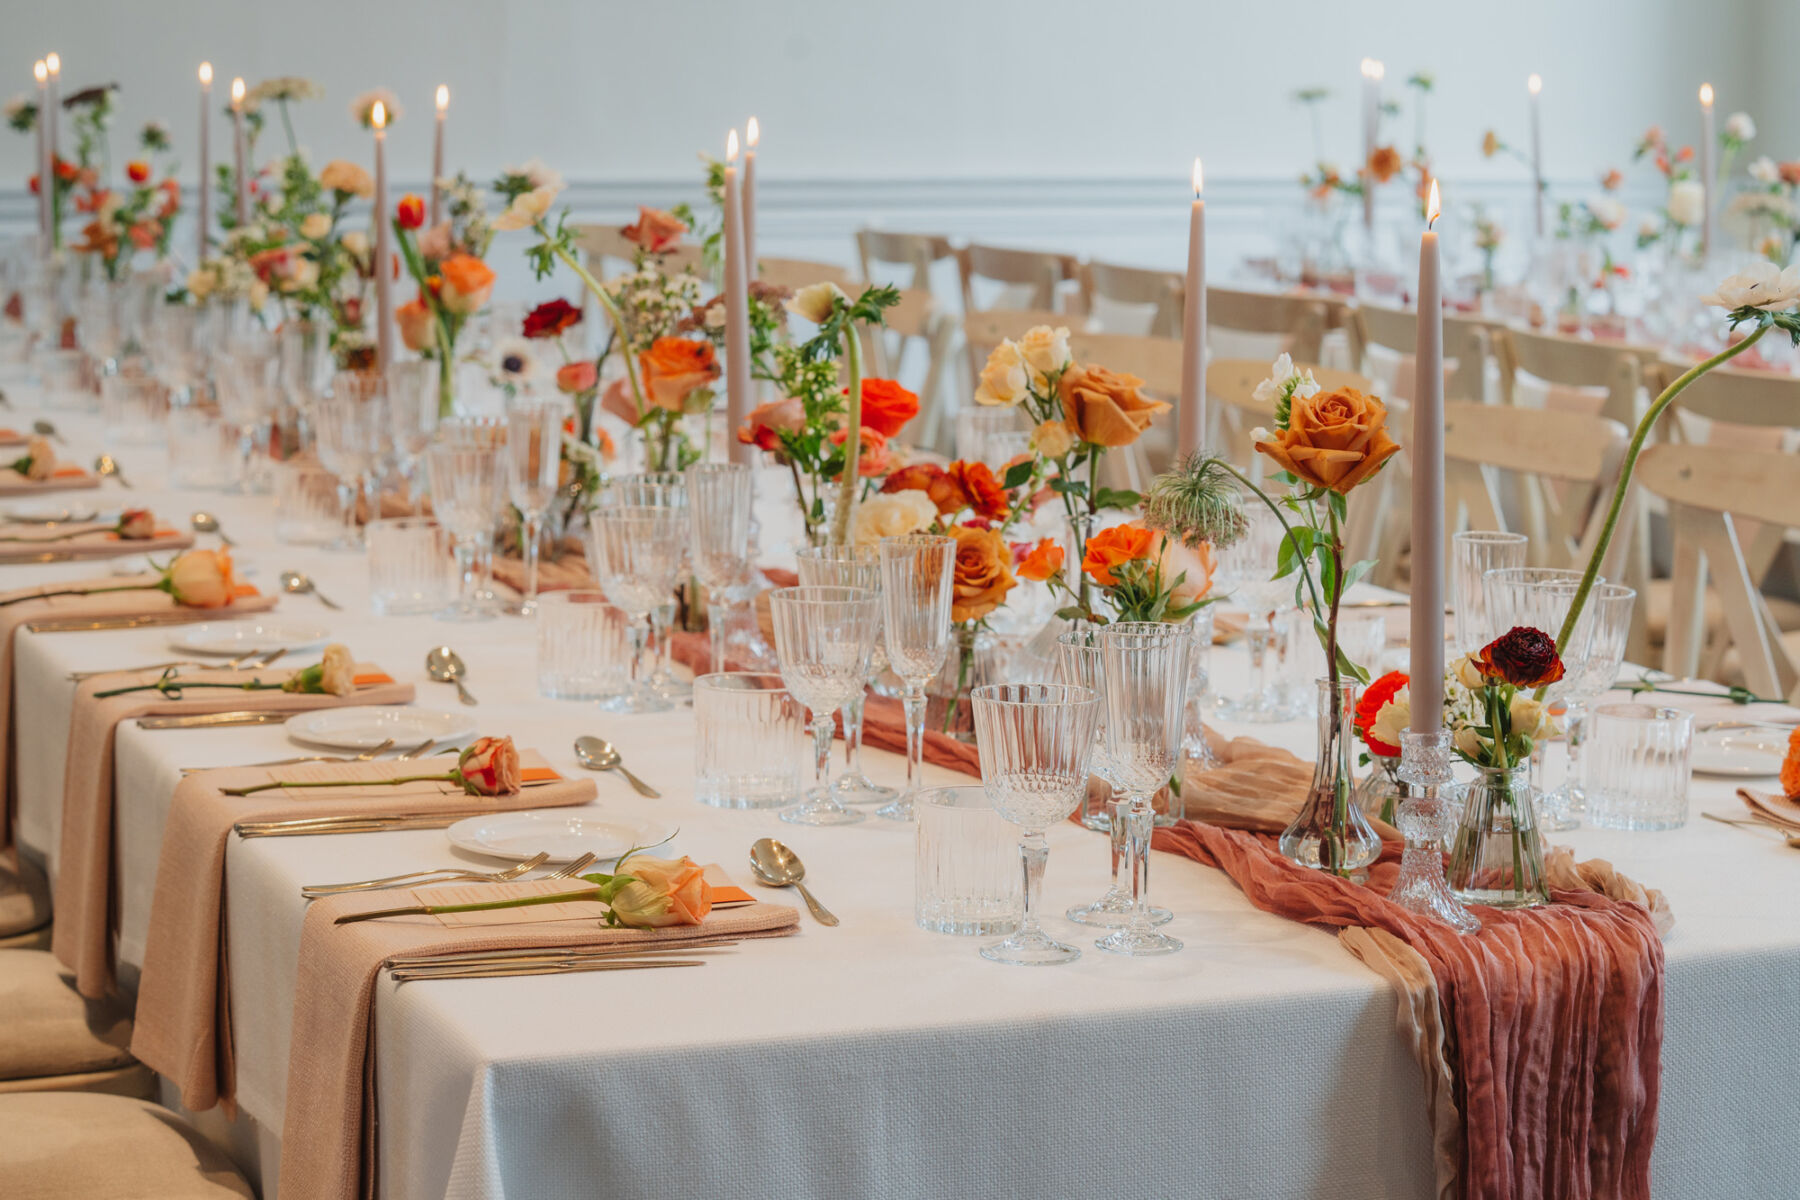 Ribbed glasses and elegant taper candles. Hand dyed table runners in natural shades. Orange and cream roses.